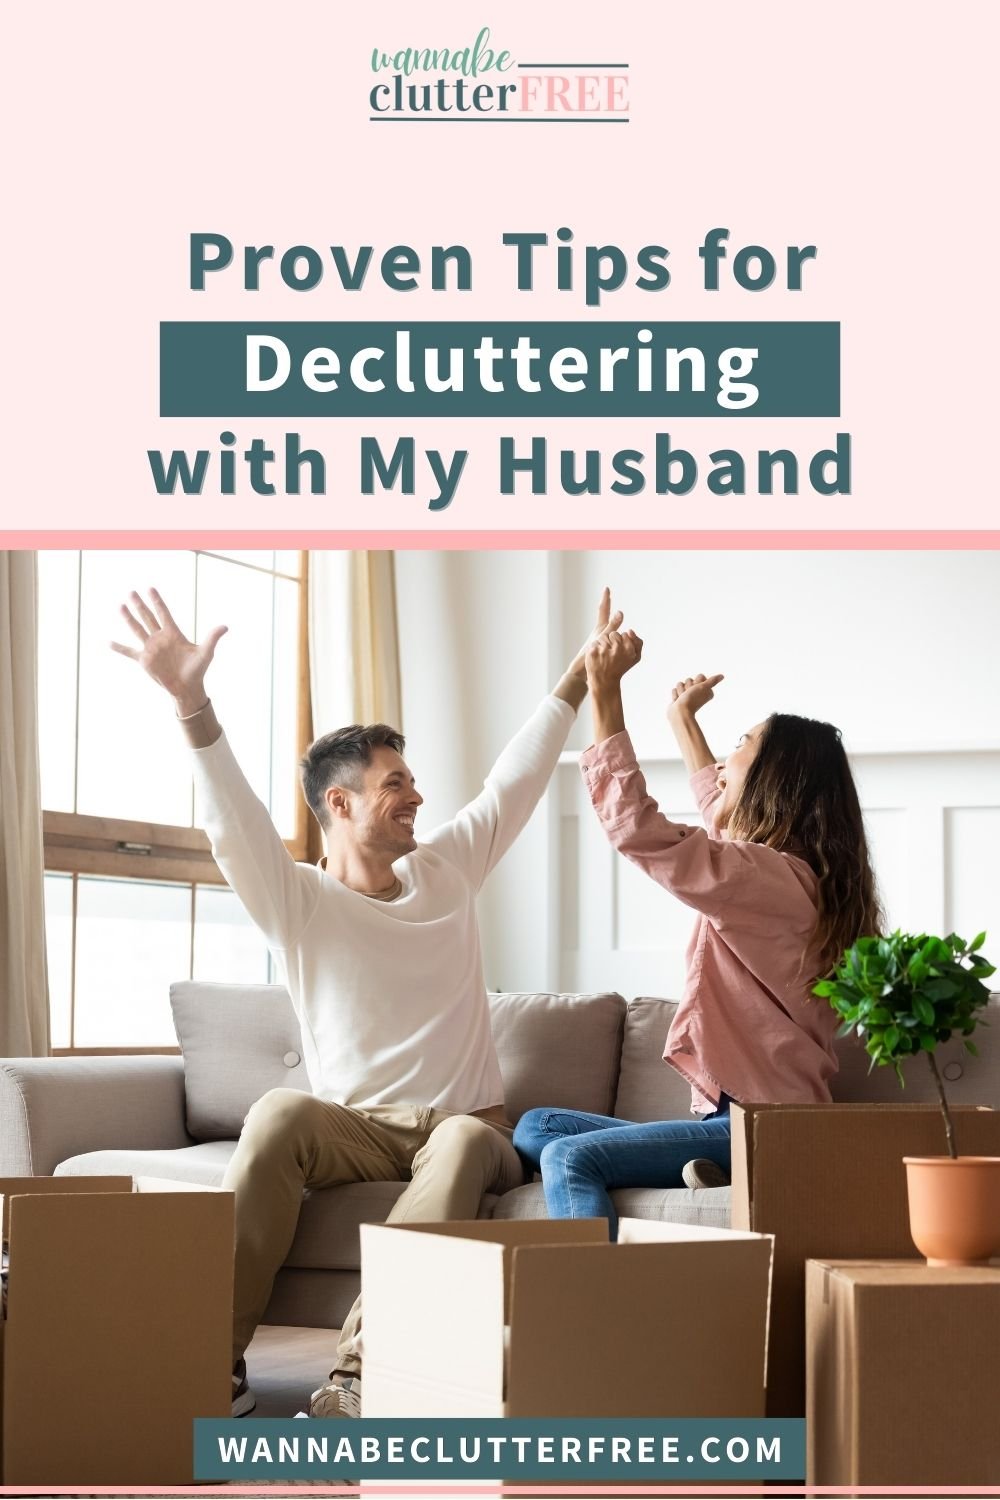 Proven tips for decluttering with my husband